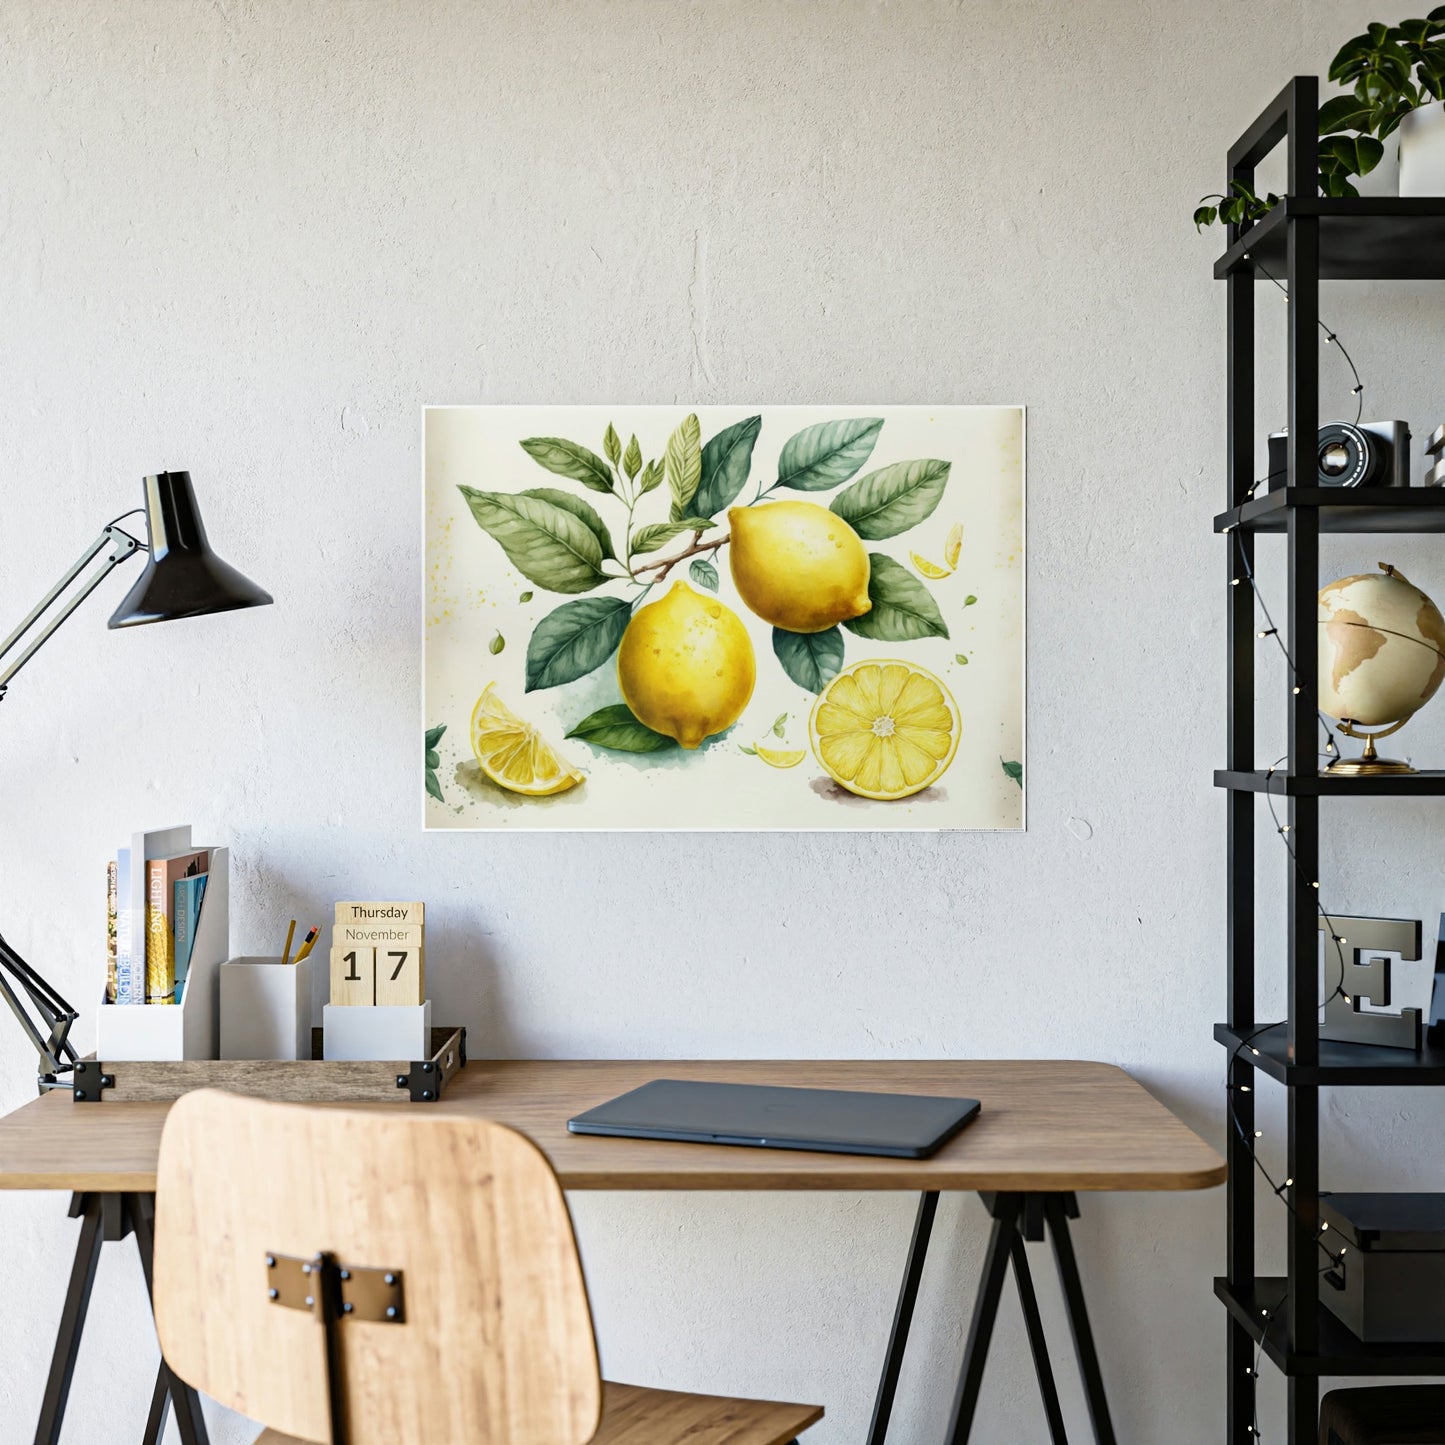 Elegant and Beautiful Canvas Art Prints and Framed Posters Featuring a Yellow Lemon Design